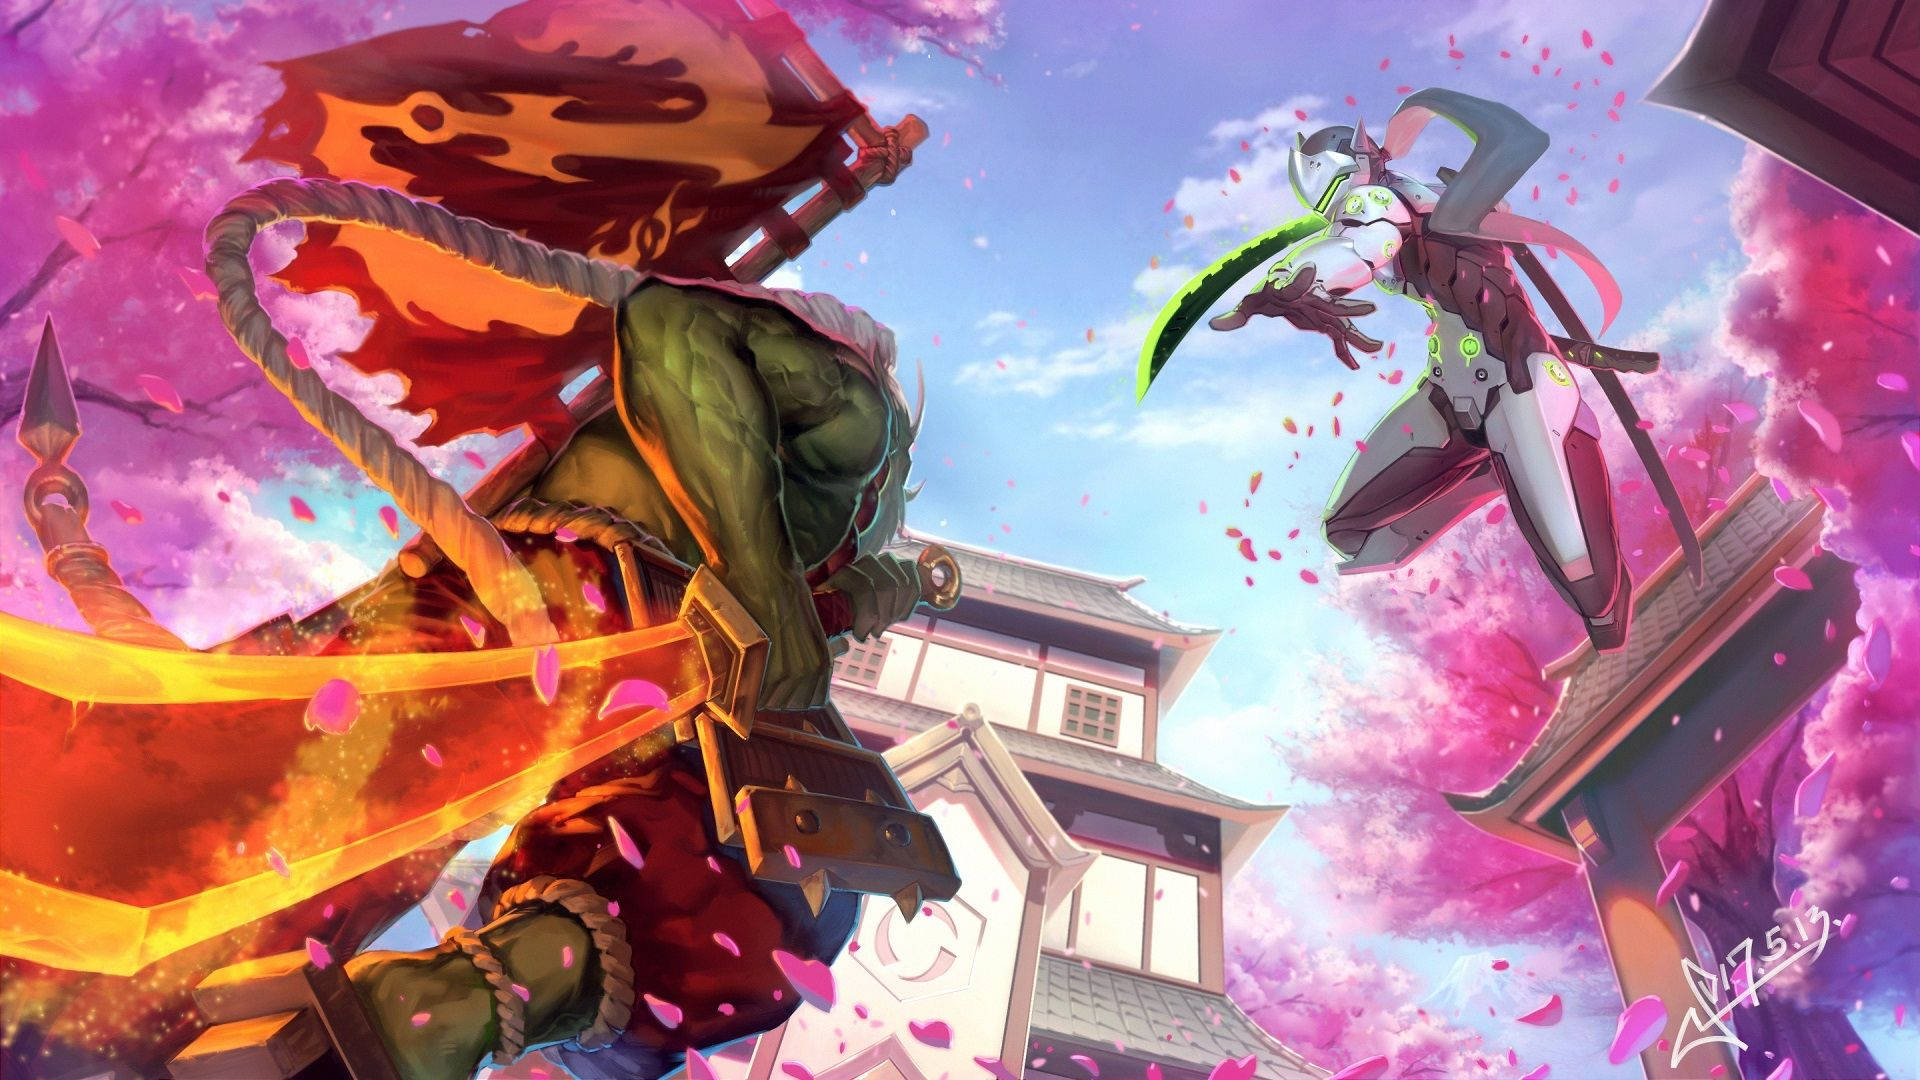 Genji and his sister, Sakura, team up for an all-out assault. Wallpaper